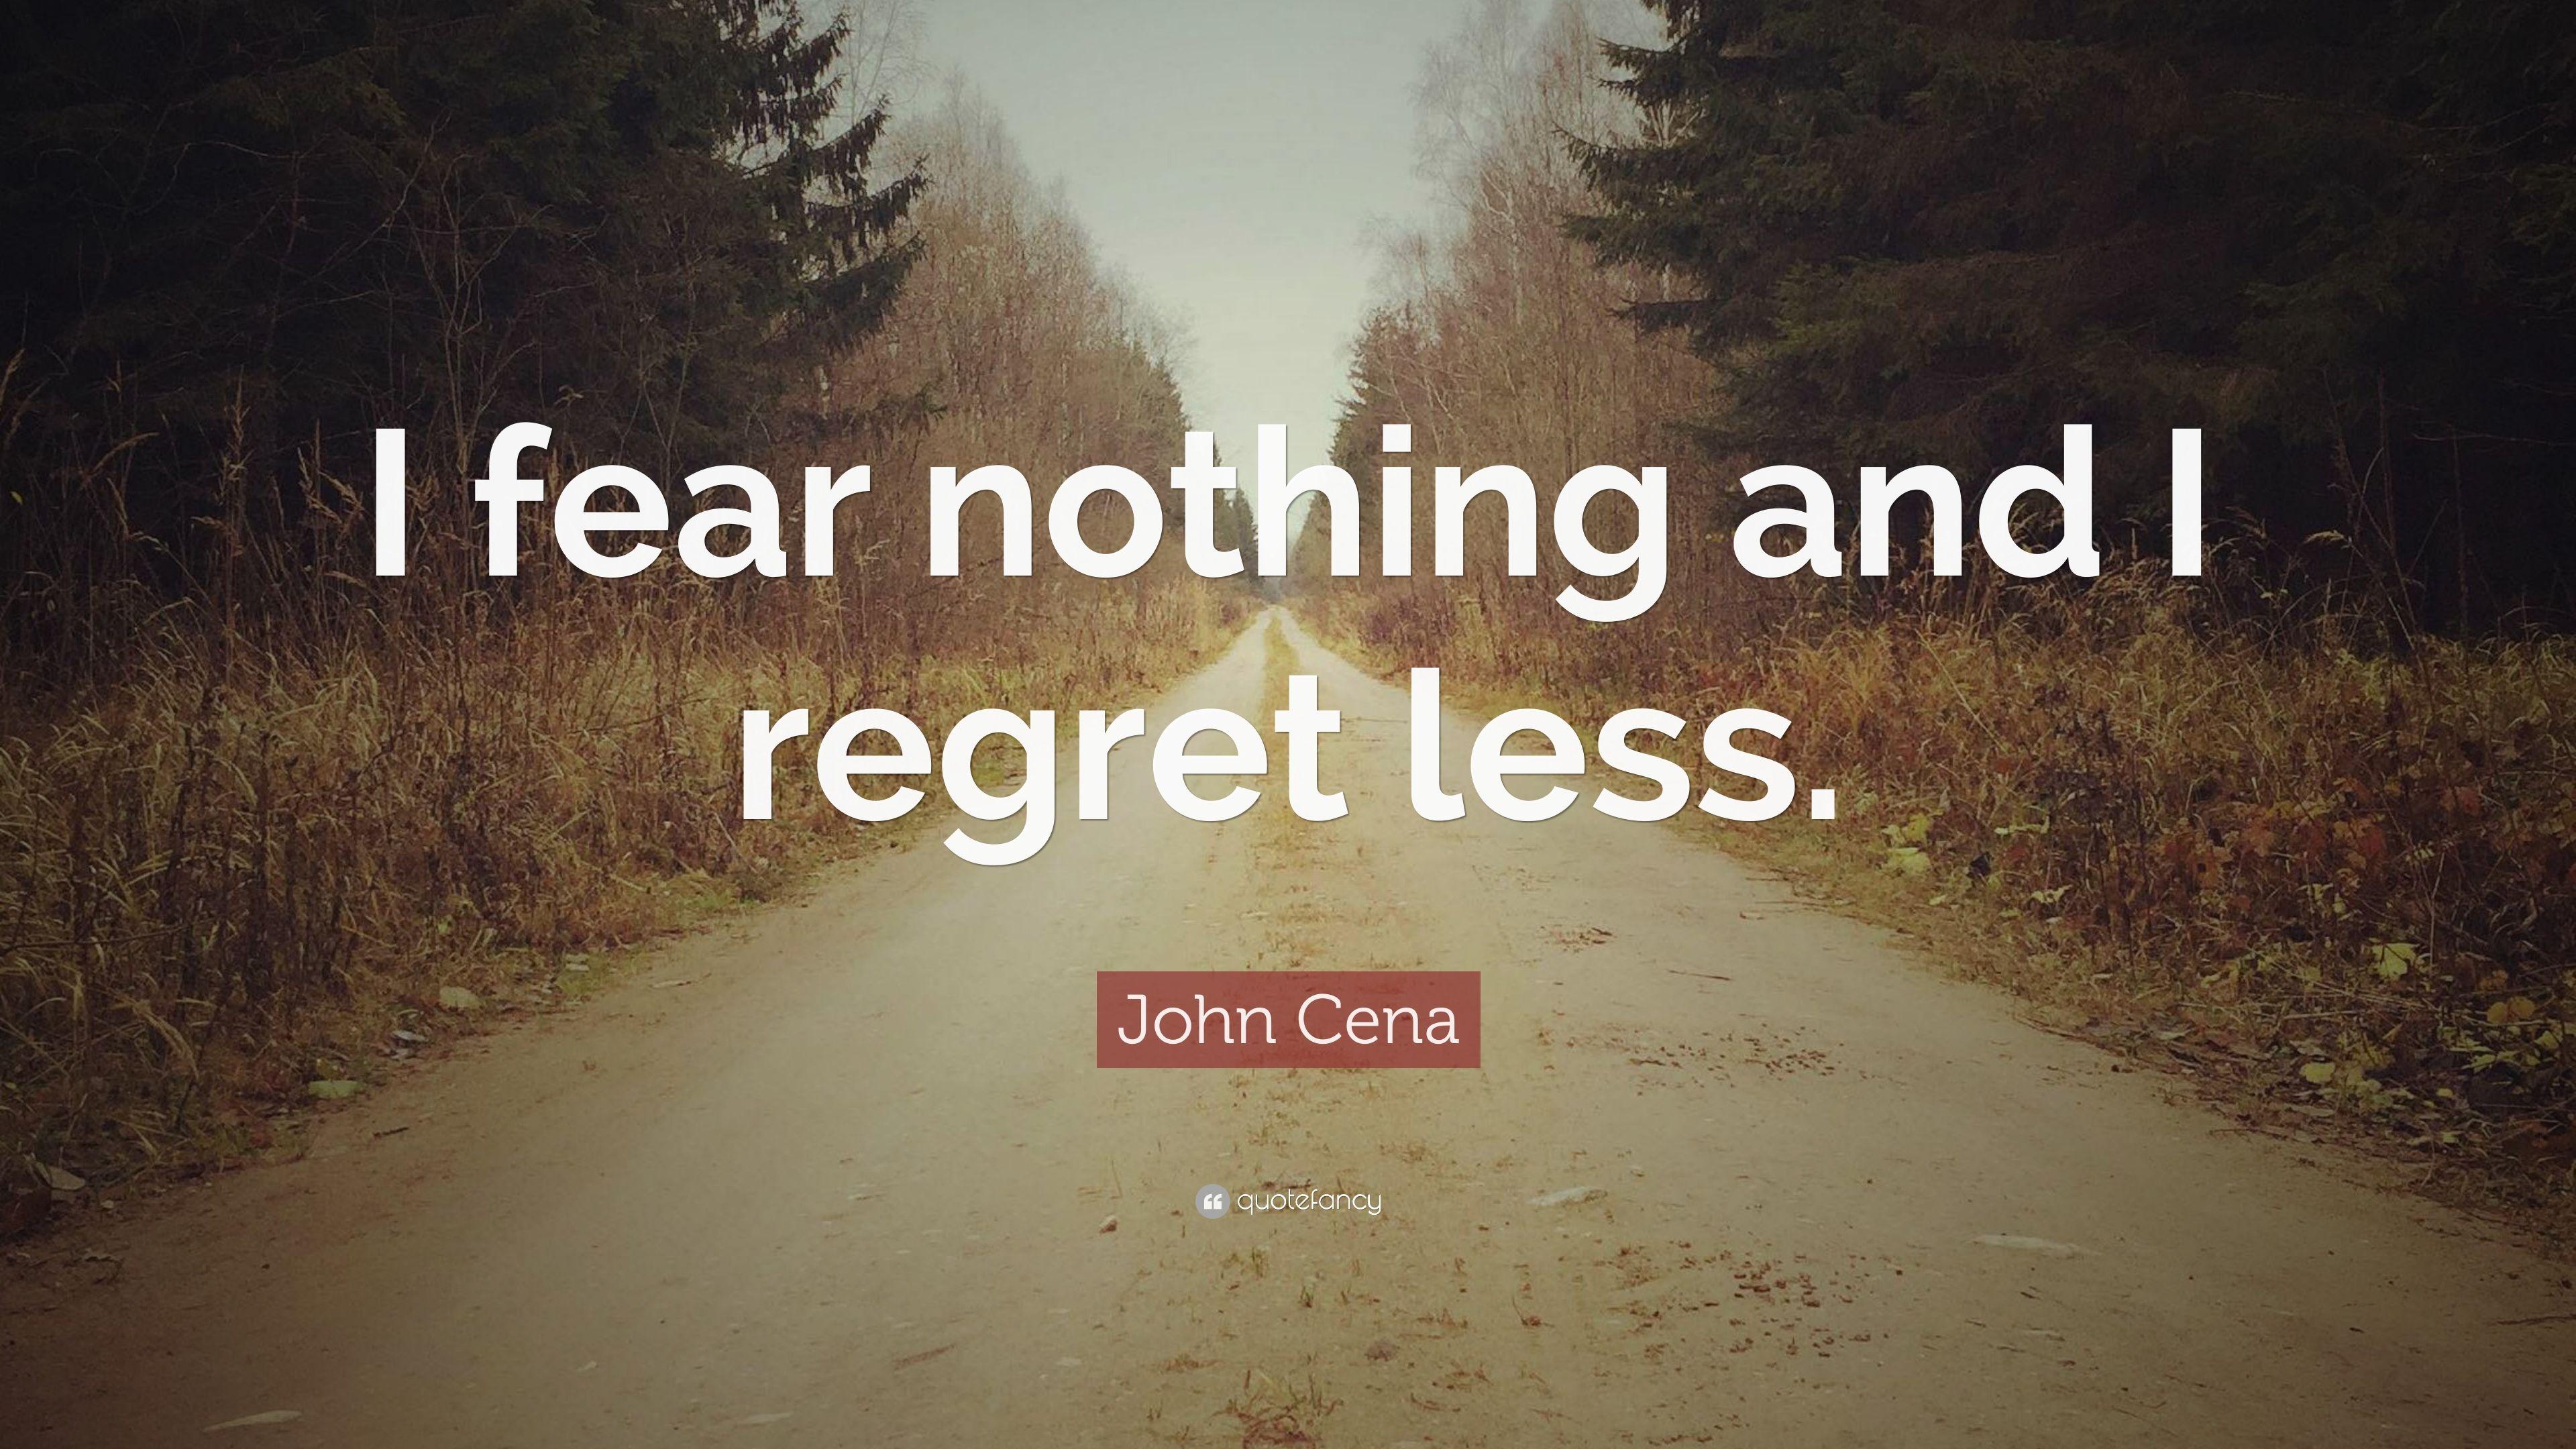 John Cena Quote: “I fear nothing and I regret less.” 9 wallpaper